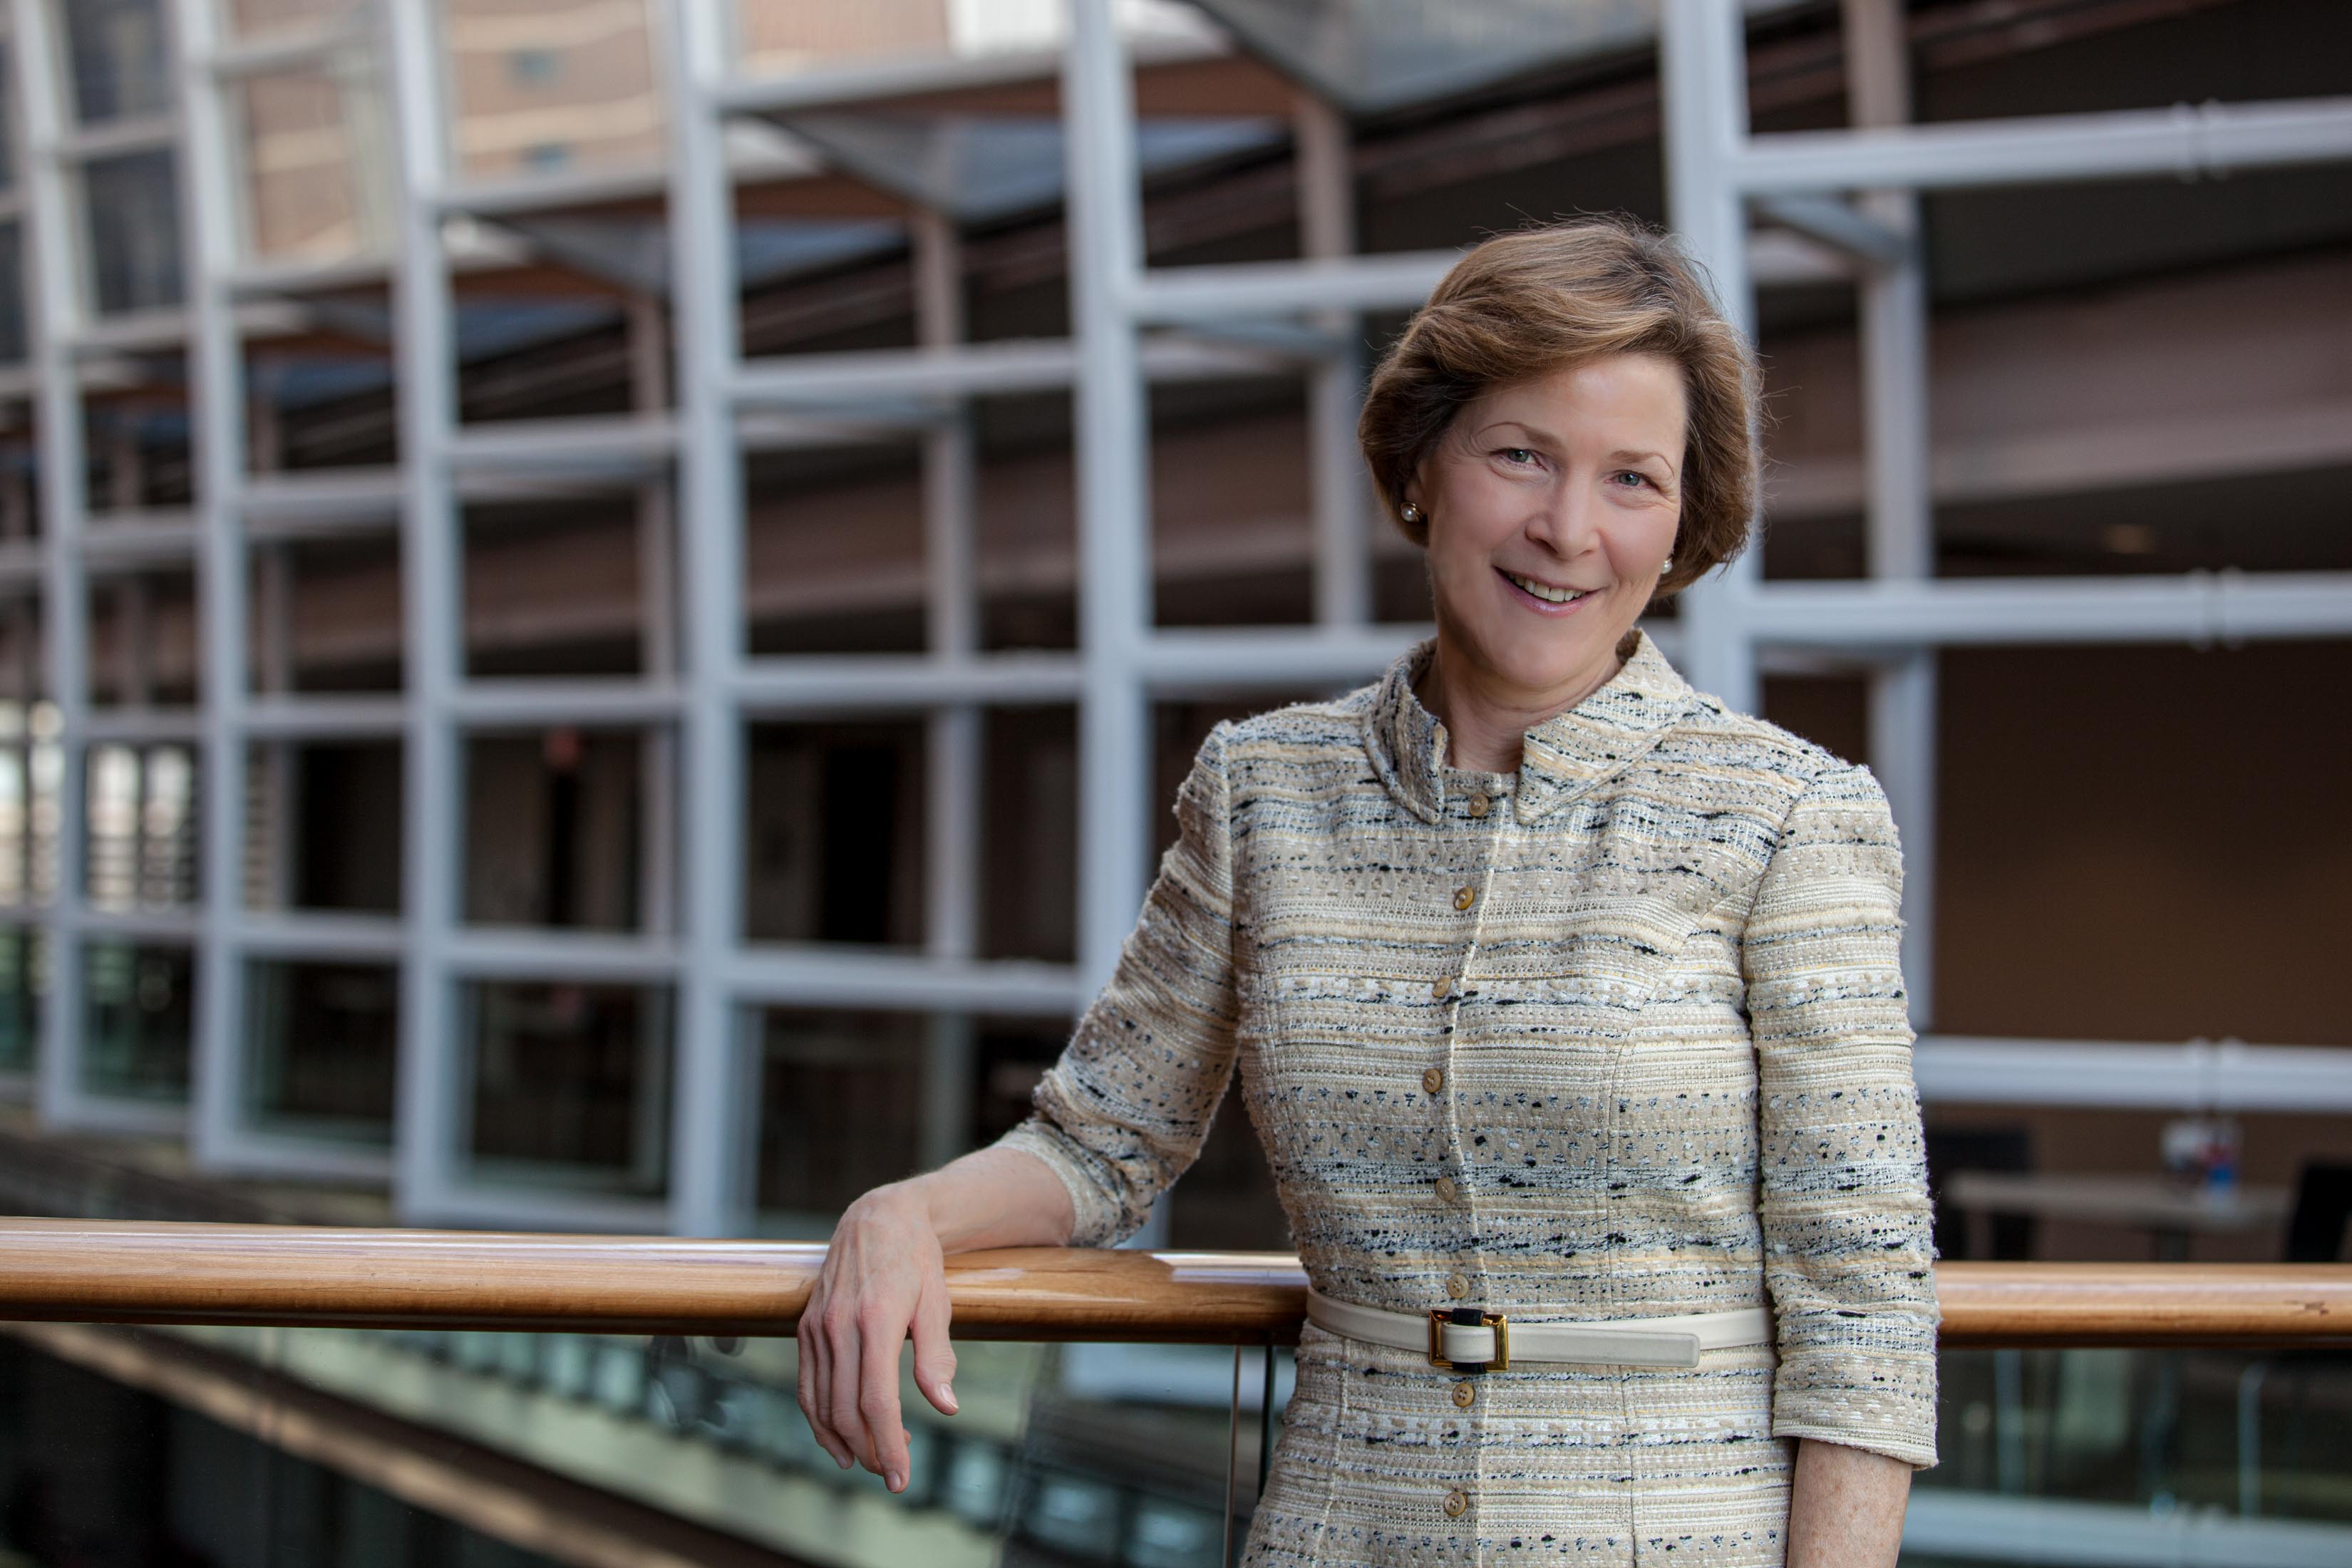 As she retires after 14 years as our fearless leader, we look back at the career and legacy of our President & CEO Anne Ewers